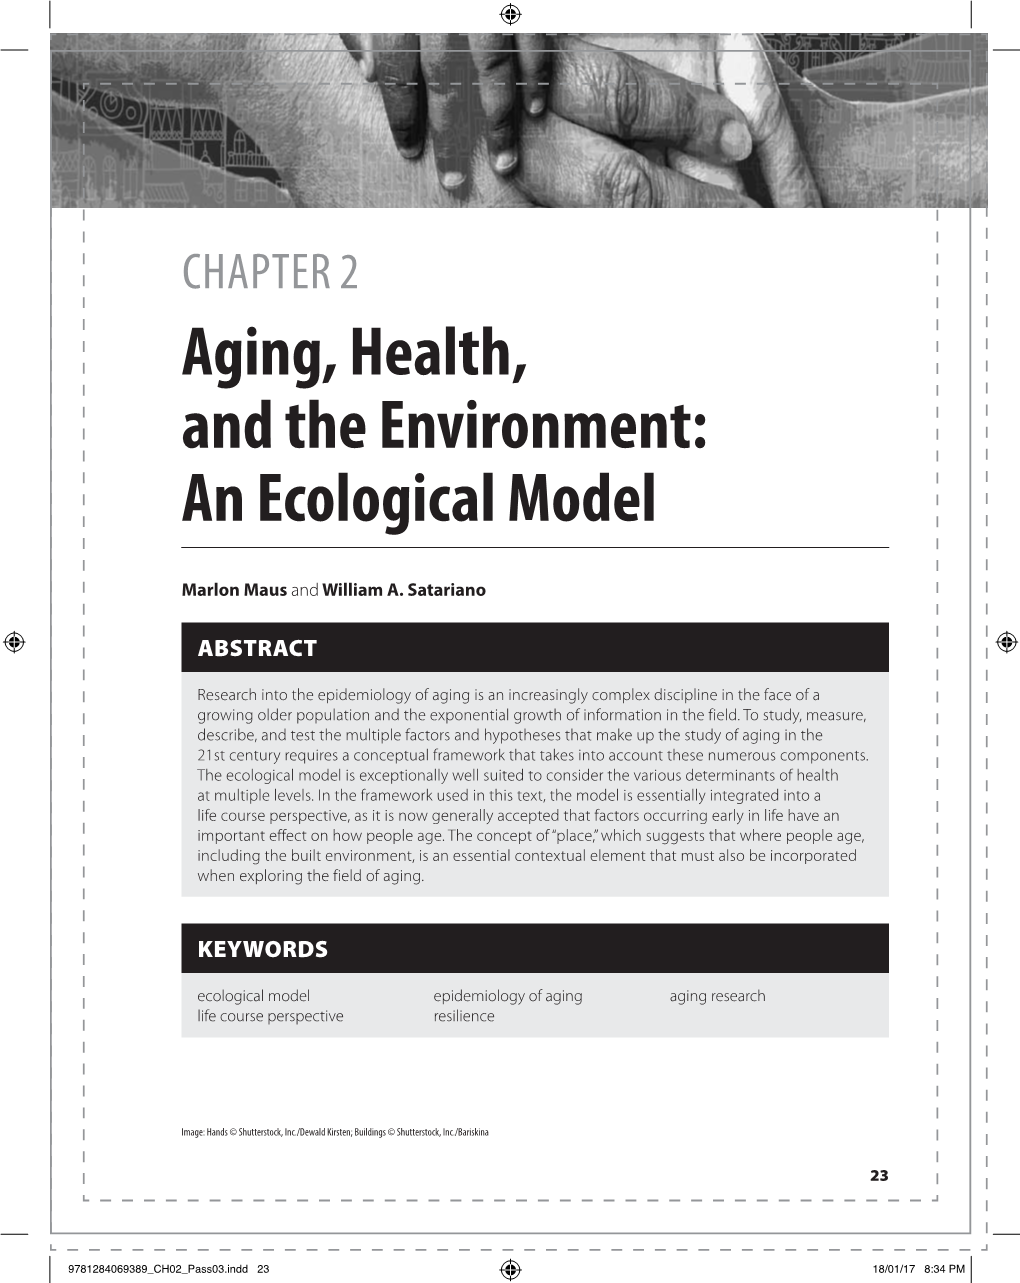 CHAPTER 2 Aging, Health, and the Environment: an Ecological Model